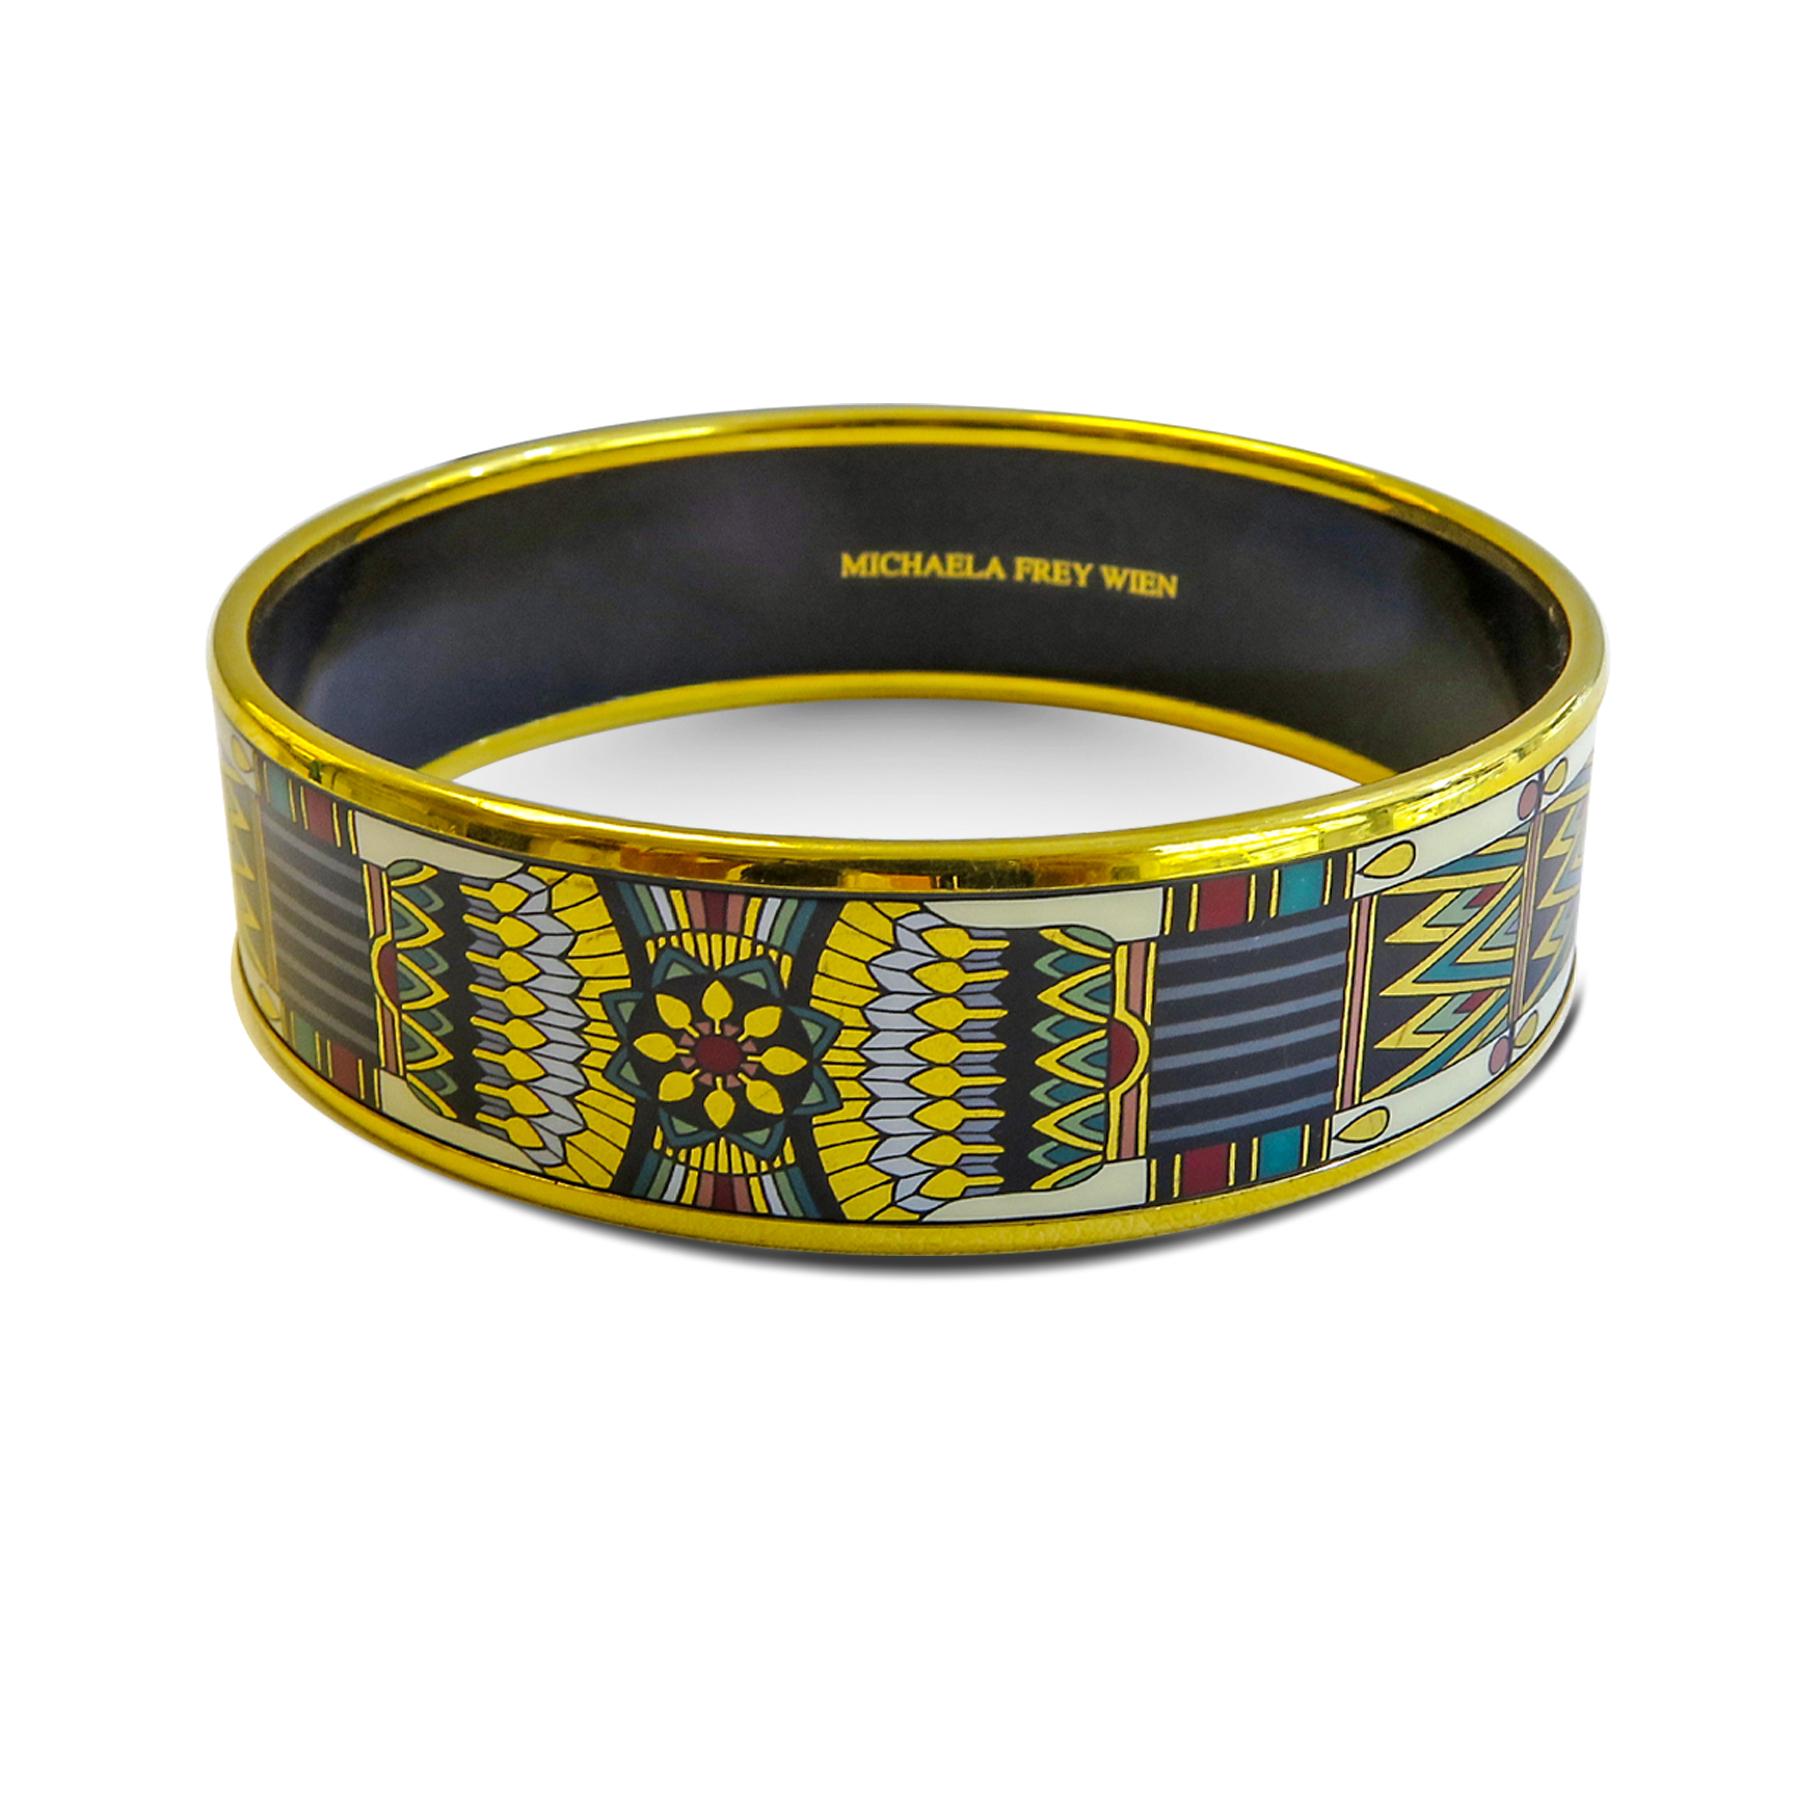 Like every Michaela Frey Wien products, this pure art. This bangle features an 18 Karat gold plated with a printed enamel. Carved in Austria, It weighs 44.5 grams, 20mm wide and has an inner diameter of 2.7 inches to give a comfortable fit in your